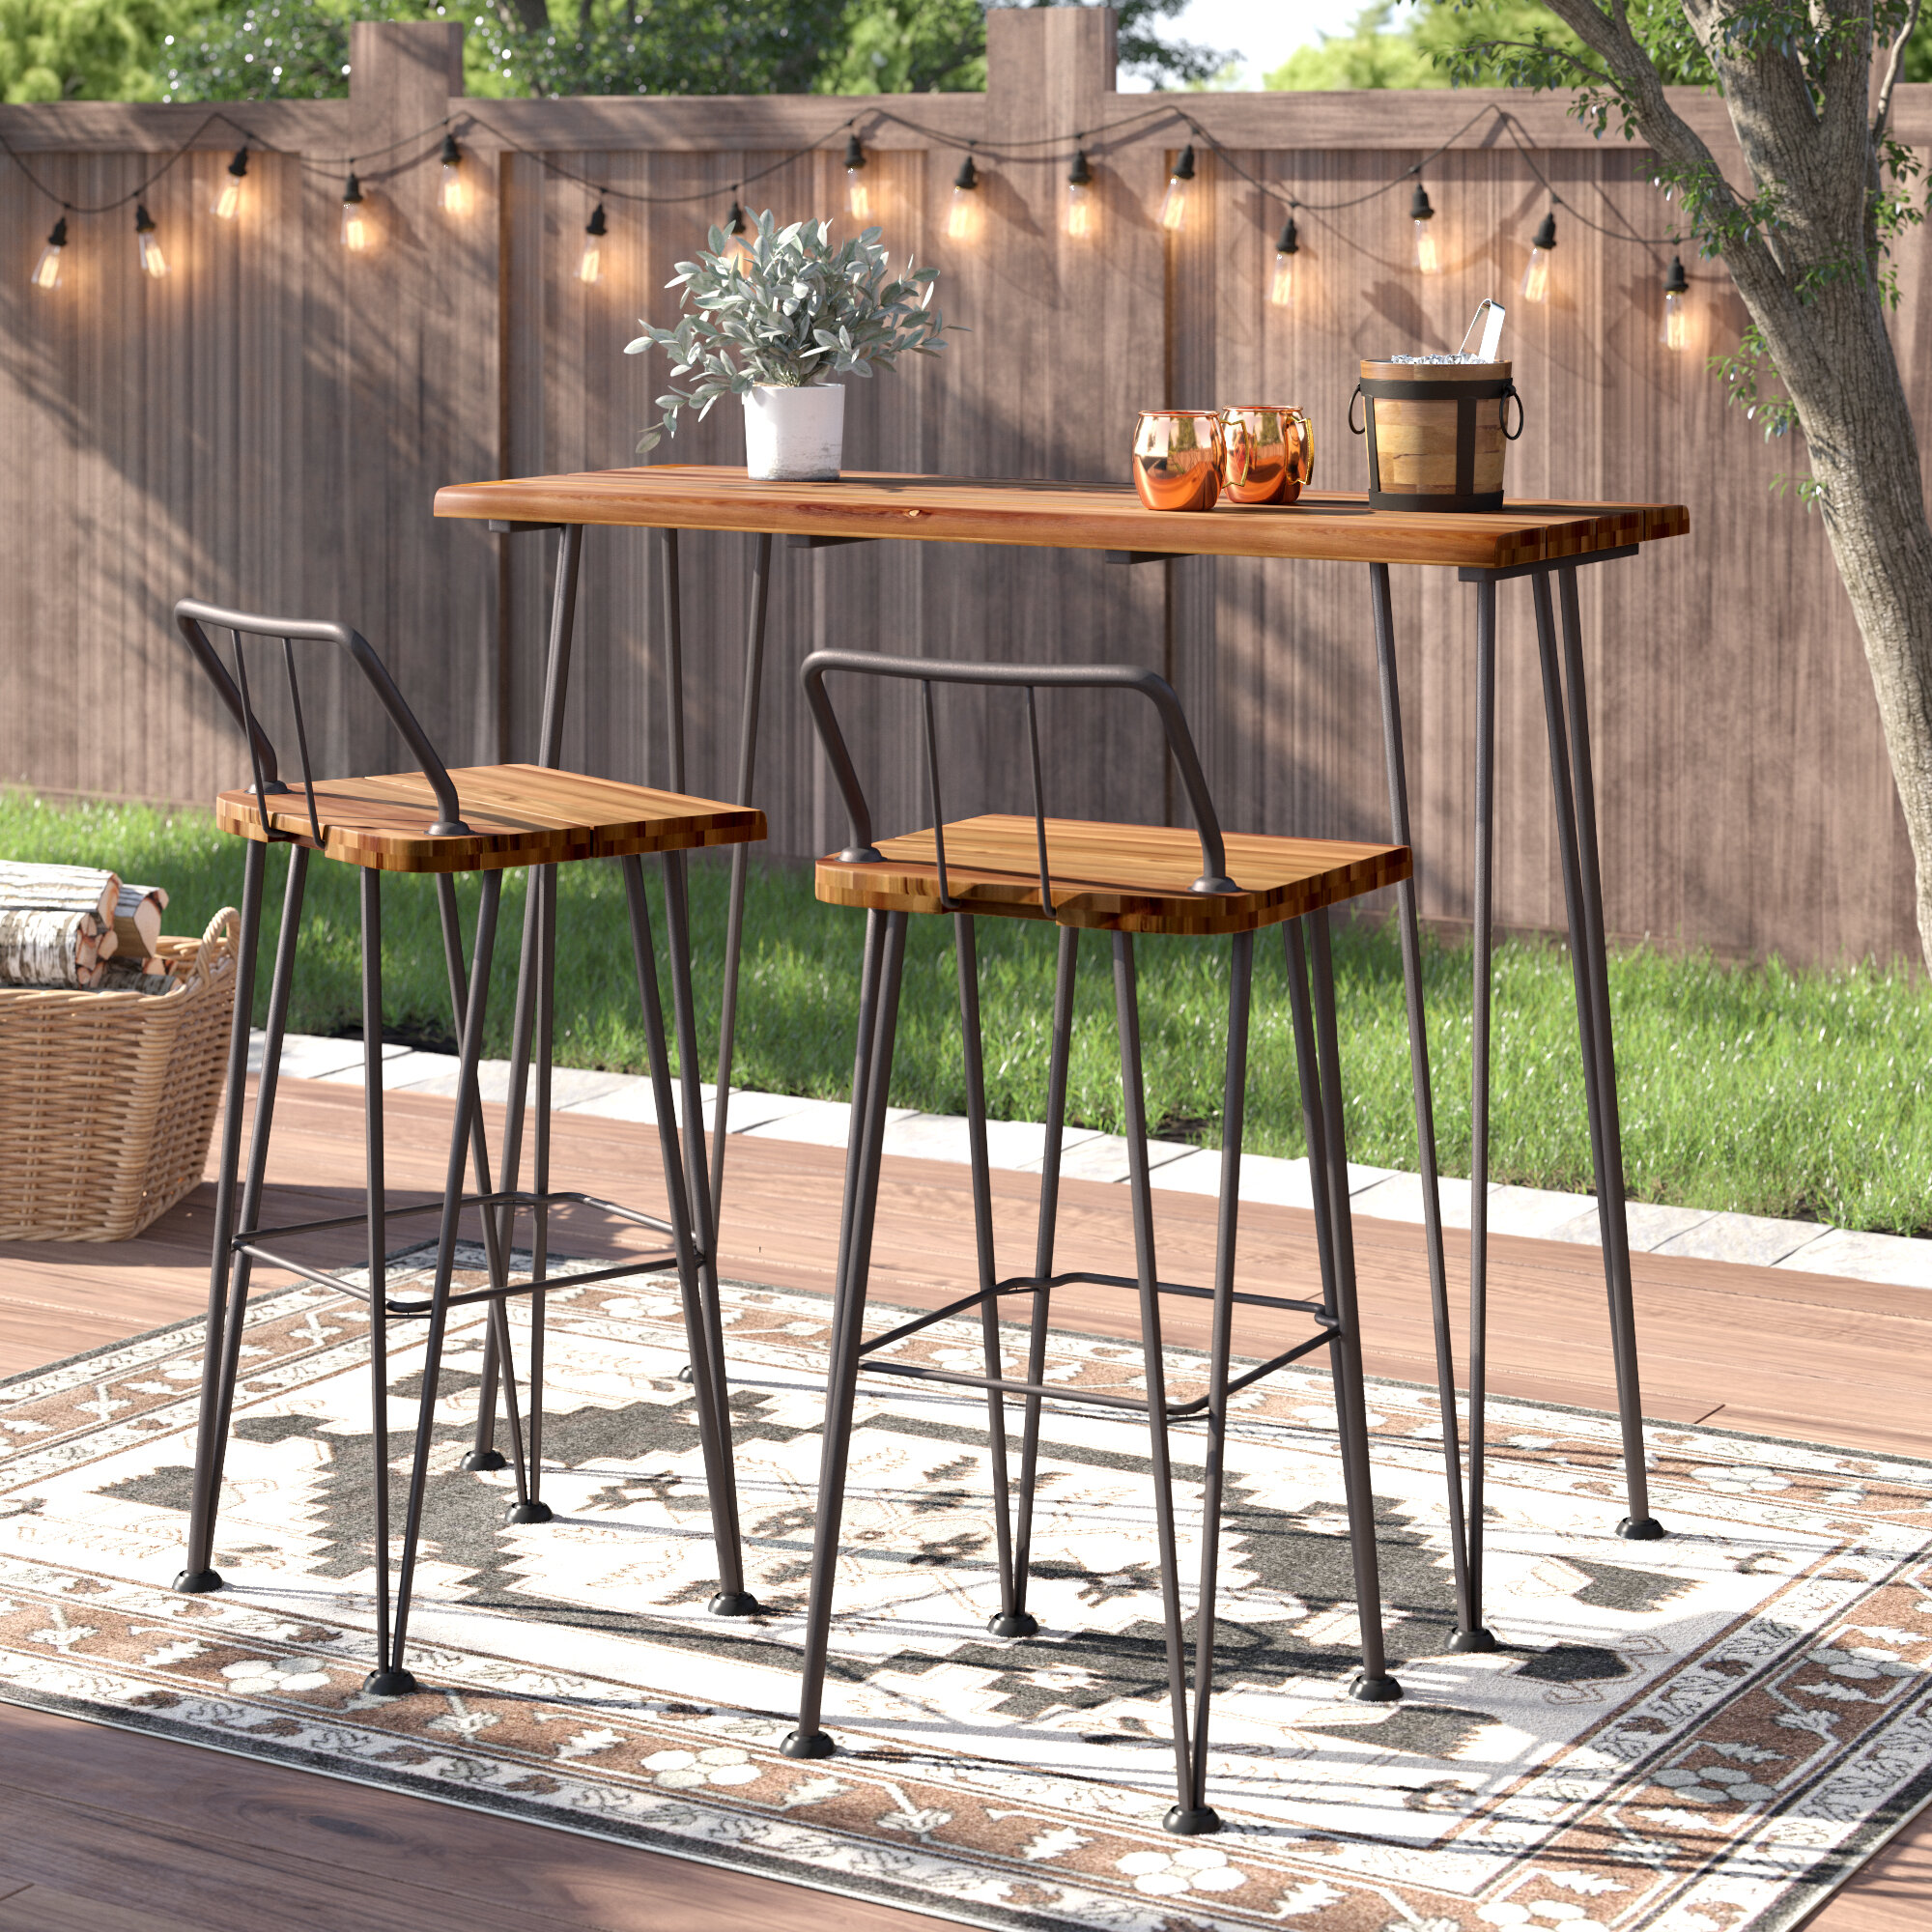 [BIG SALE] Top-Rated Patio Bar Sets You’ll Love In 2020 | Wayfair